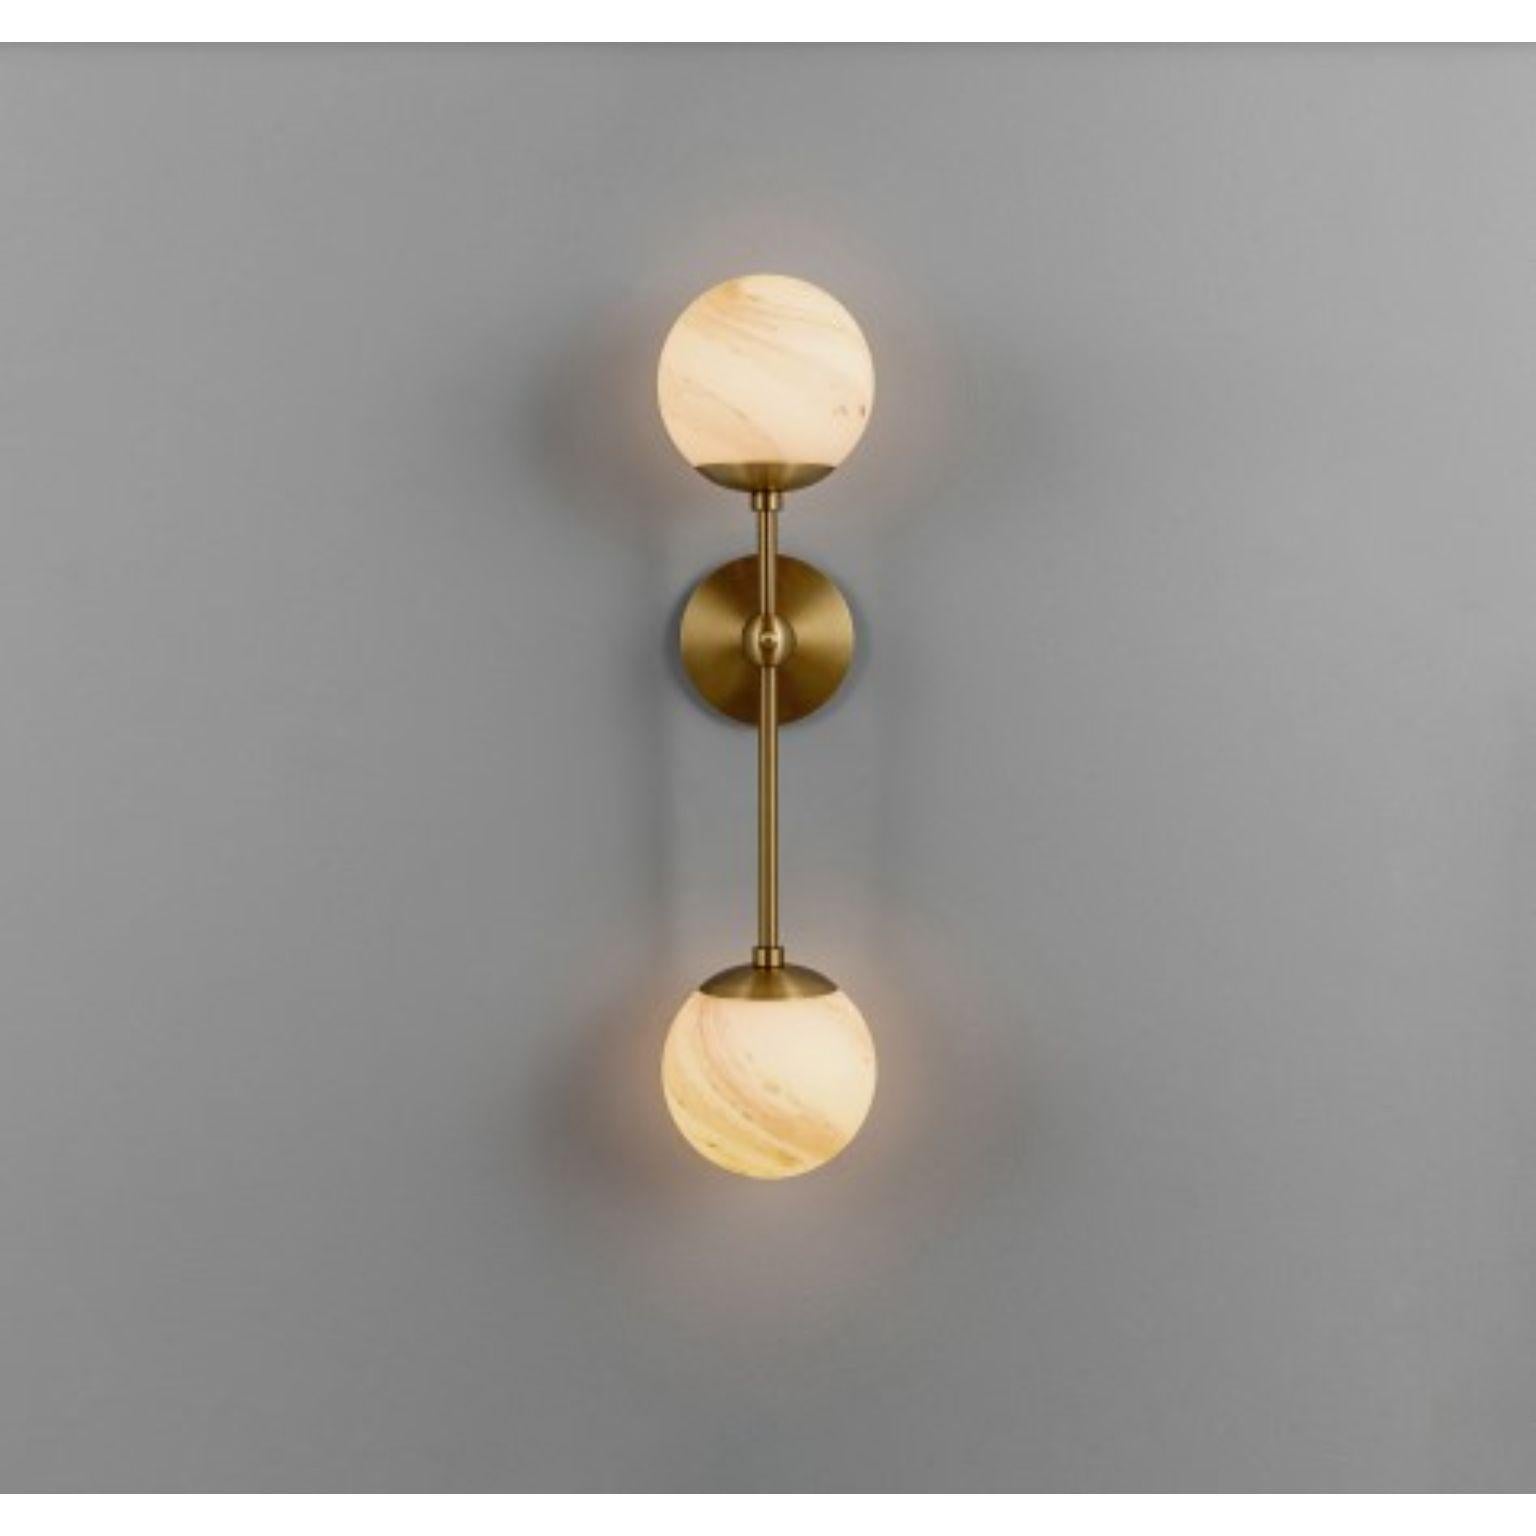 Armstrong Dual Wall Sconce by Schwung
Dimensions: H 63.7 x W 15 x D 16.9 cm
Materials: Brass, Opal glass
Weight: 2.6 kg

Finishes available: Black gunmetal, polished nickel, brass
Other sizes available.

 Schwung is a german word, and loosely